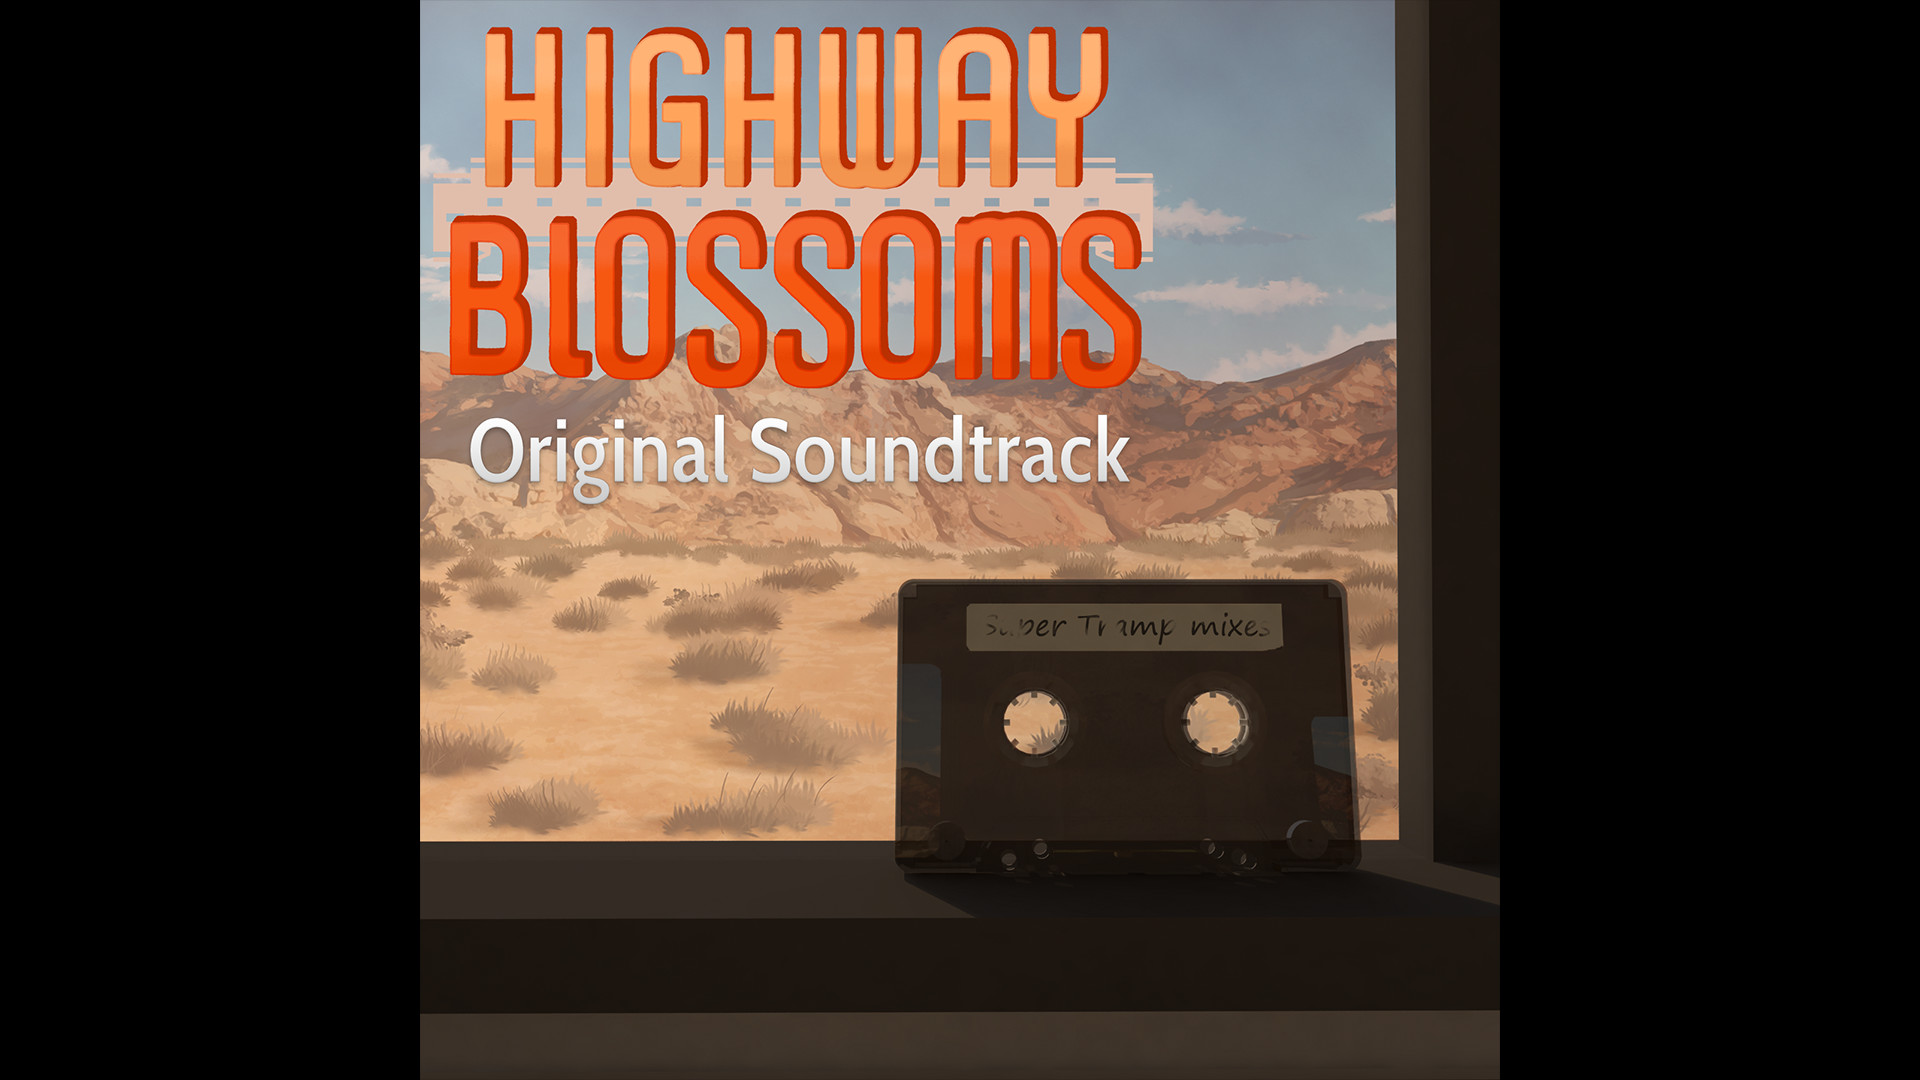 Highway Blossoms - Soundtrack Featured Screenshot #1